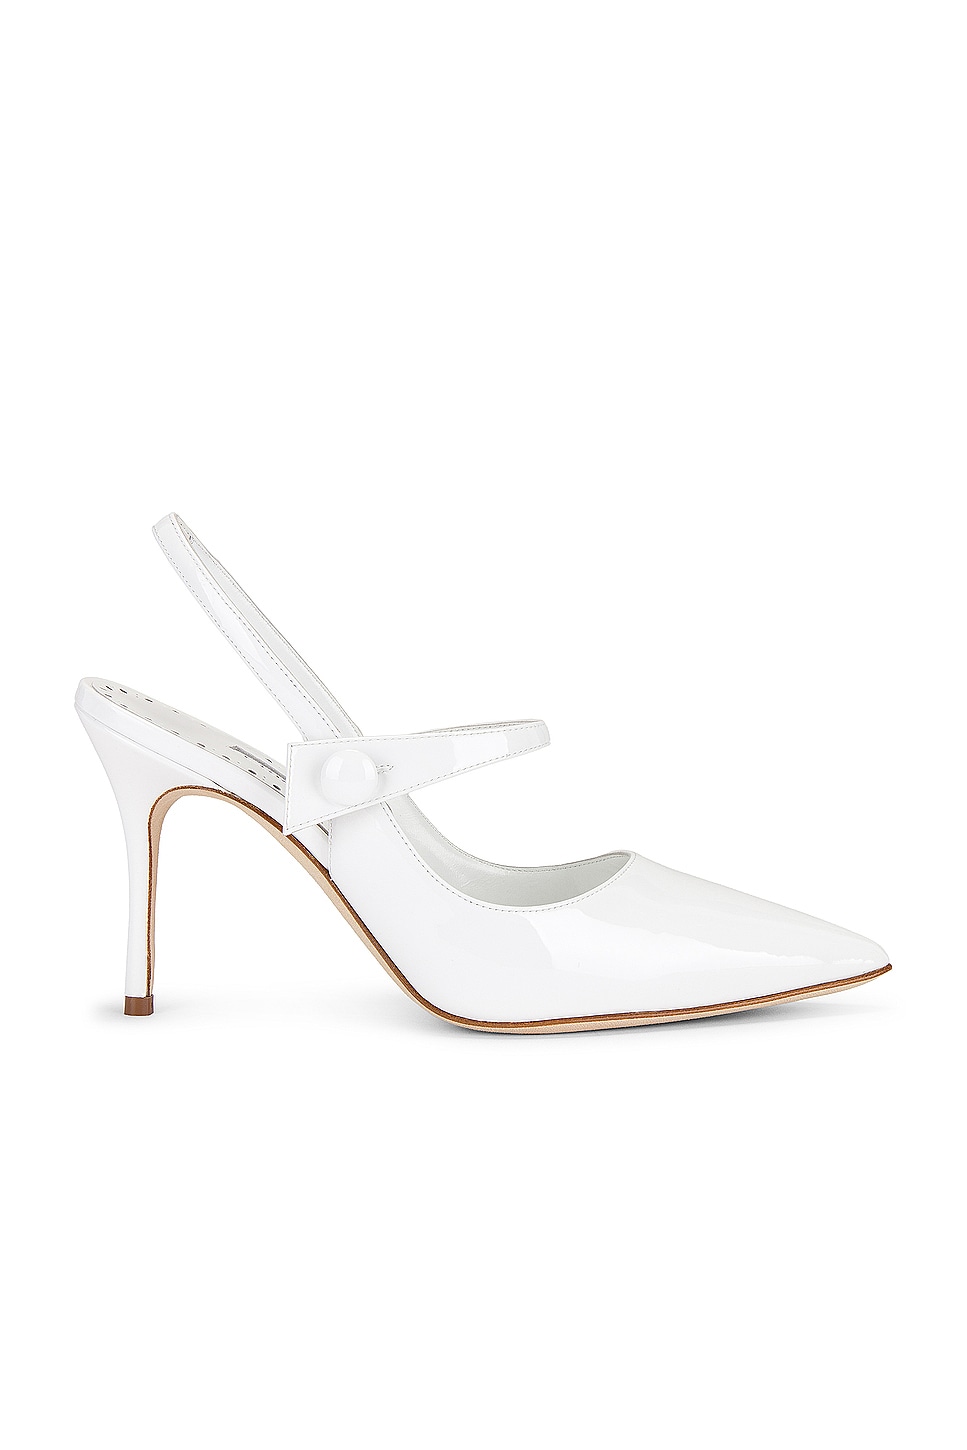 Image 1 of Manolo Blahnik Didion 90 Patent Pump in White